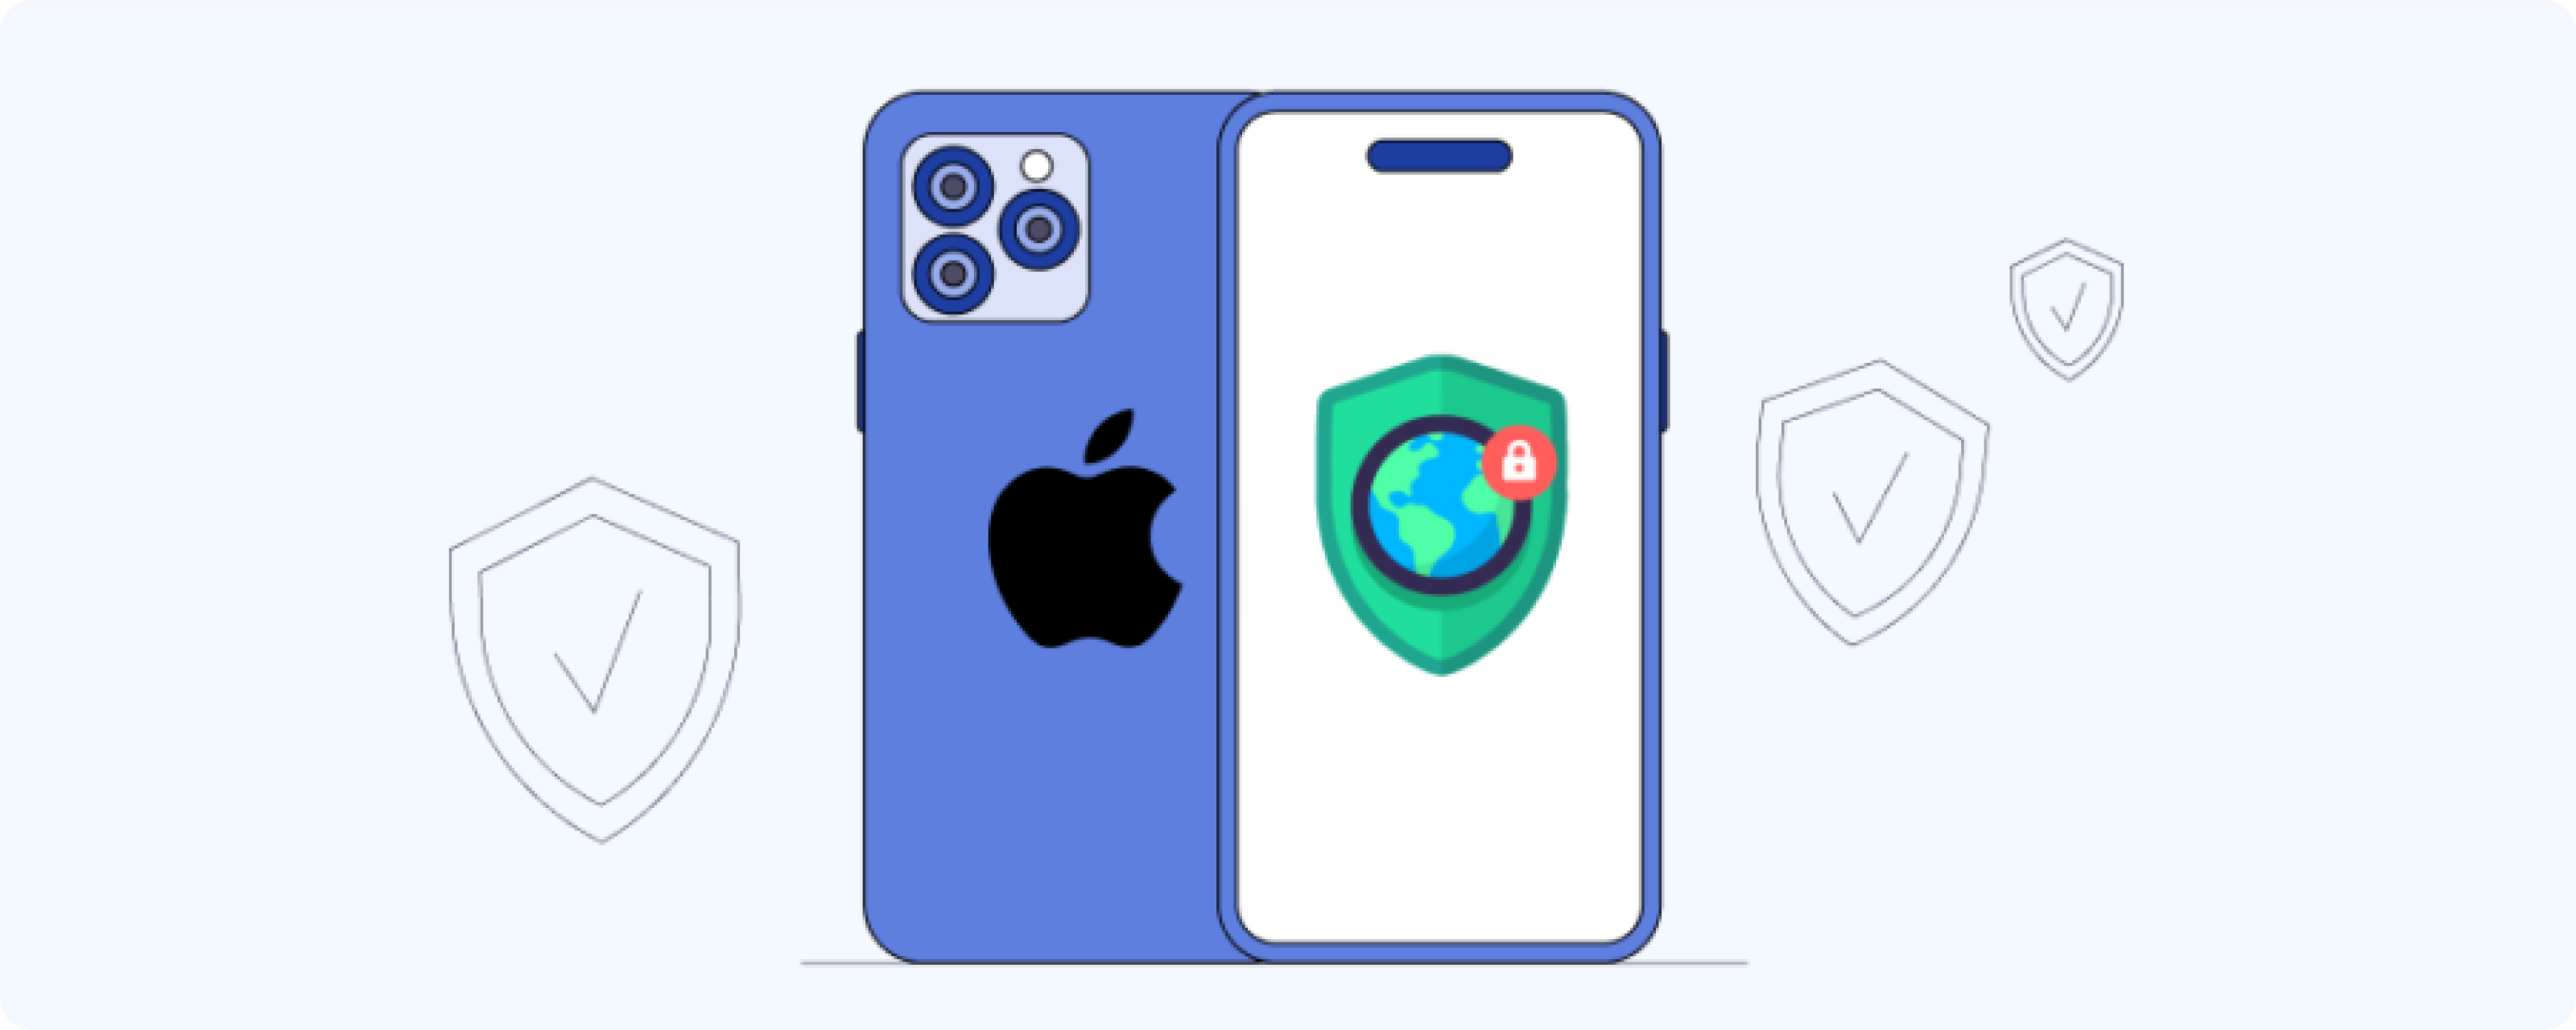 How to configure a VPN on iPhone or iPad